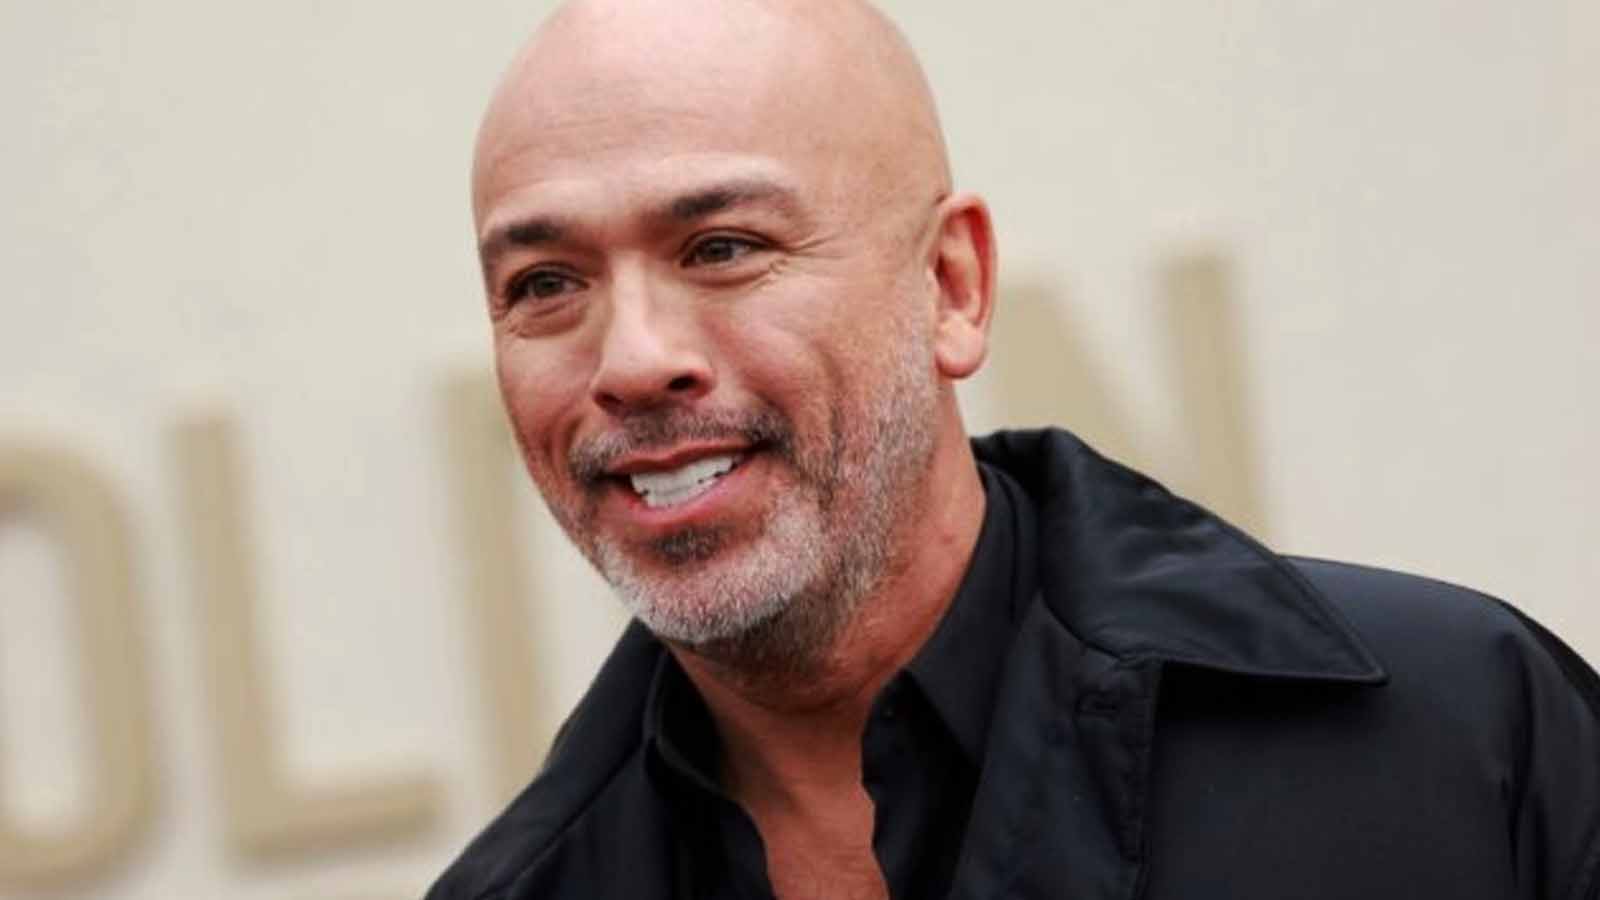 Jo Koy Plastic Surgery: Before And After Photos